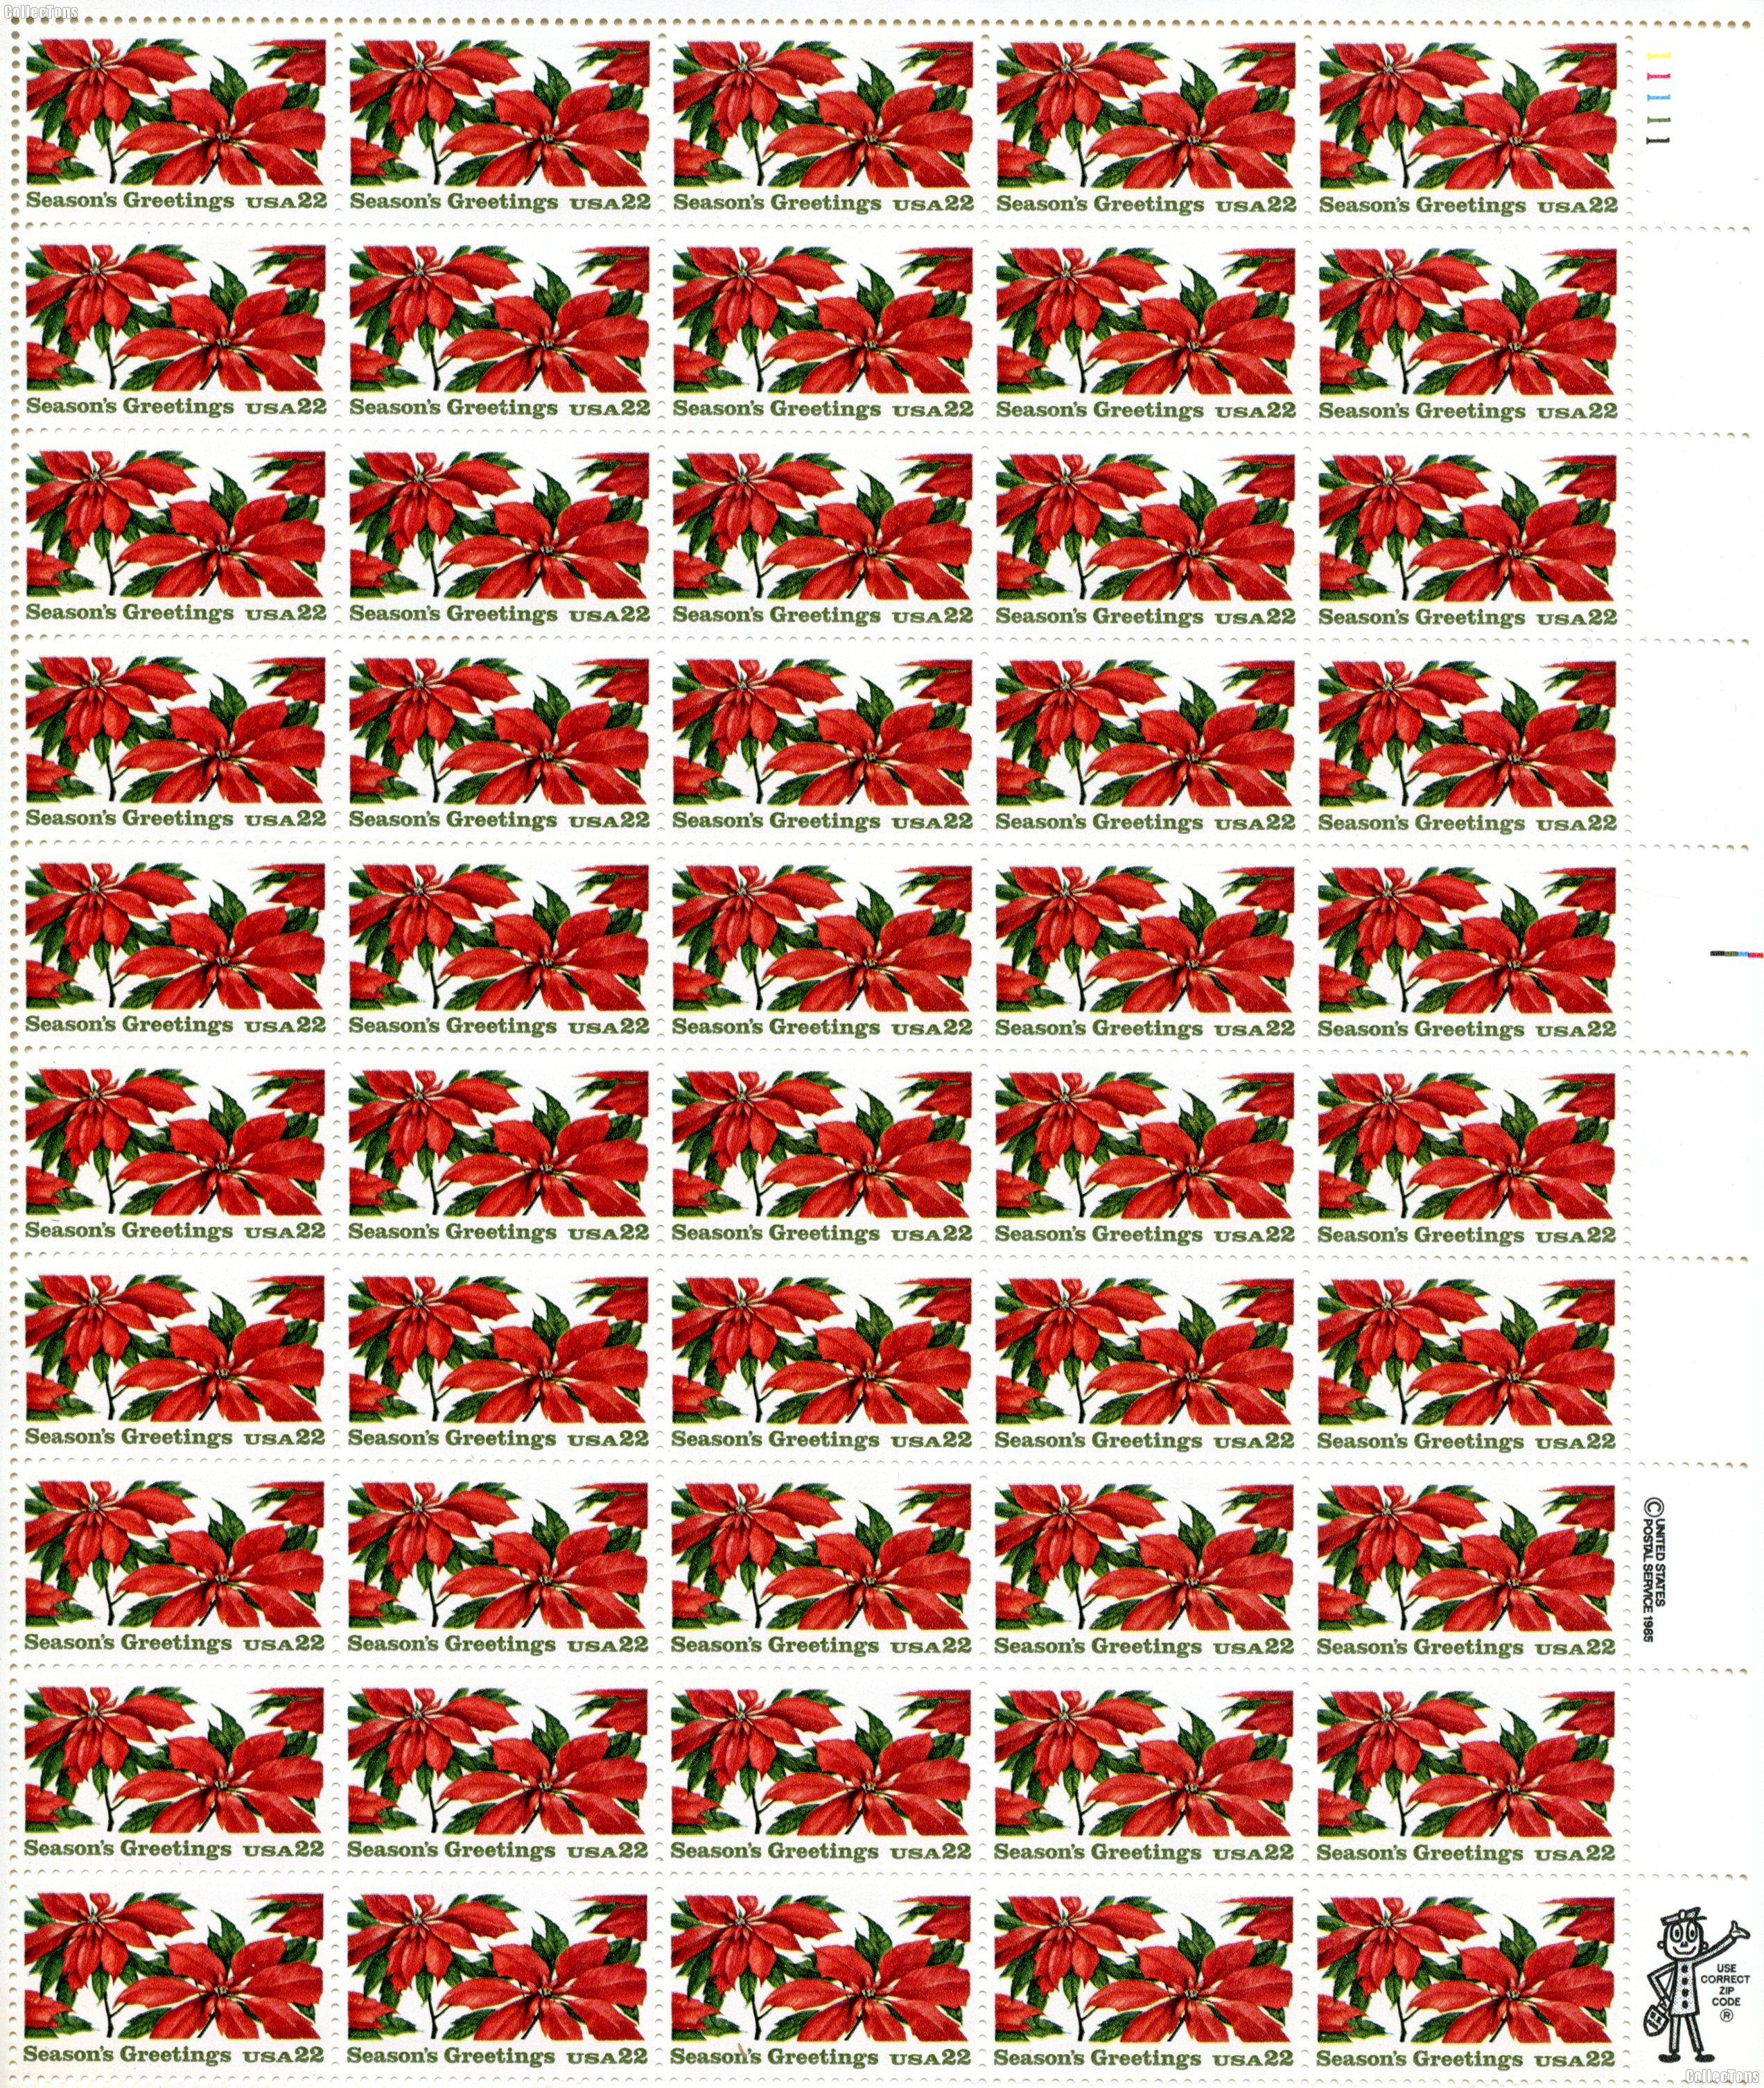 1985 Christmas (Poinsettia) 22 Cent US Postage Stamp MNH Sheet of 50 Scott #2166